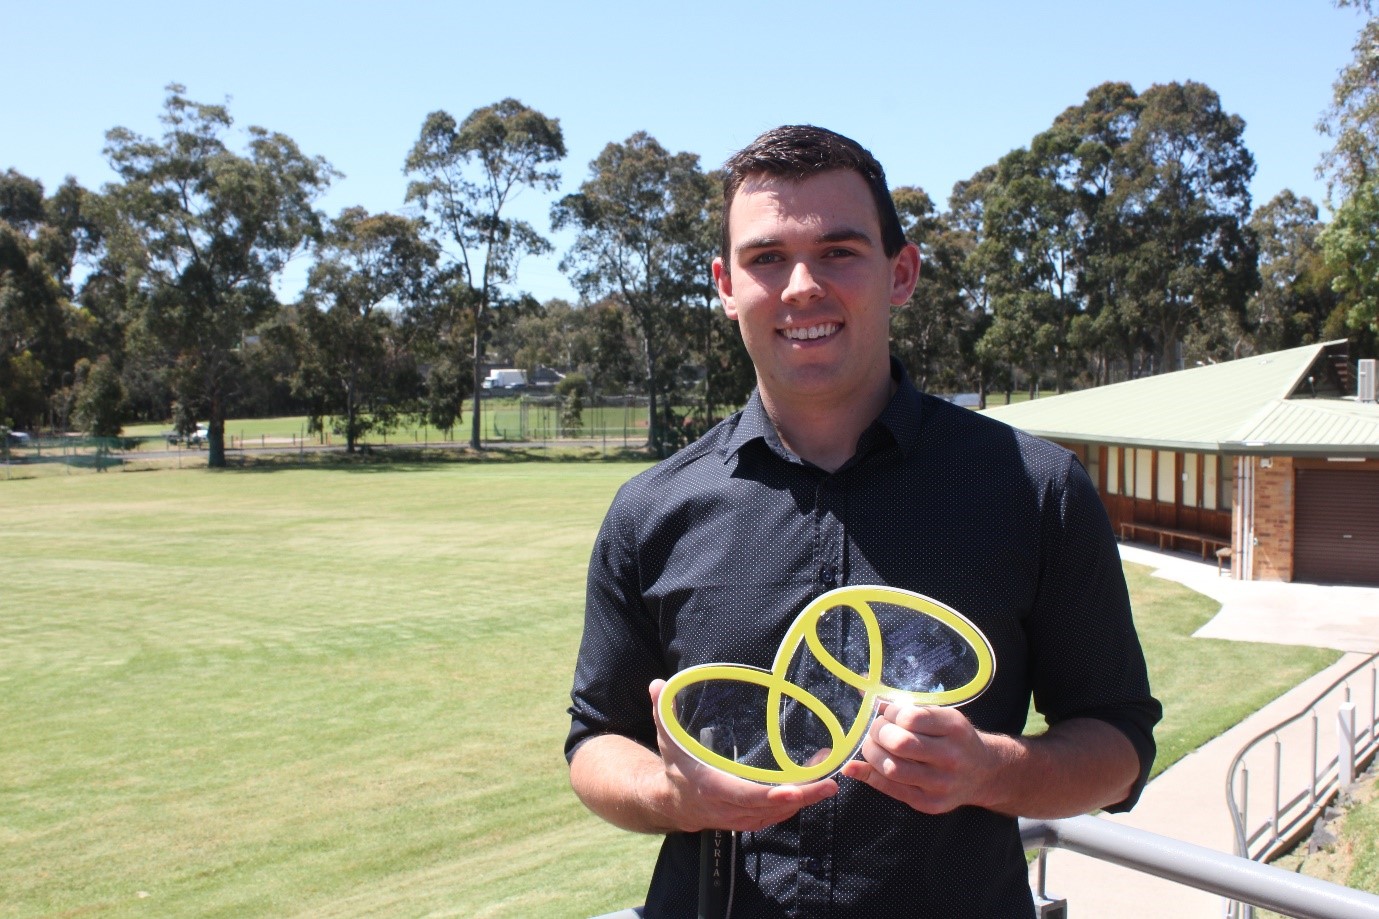 "VA Award winner Ben, holding his award which takes the shape of the VA logo of 3 yellow ovals linked together.]"